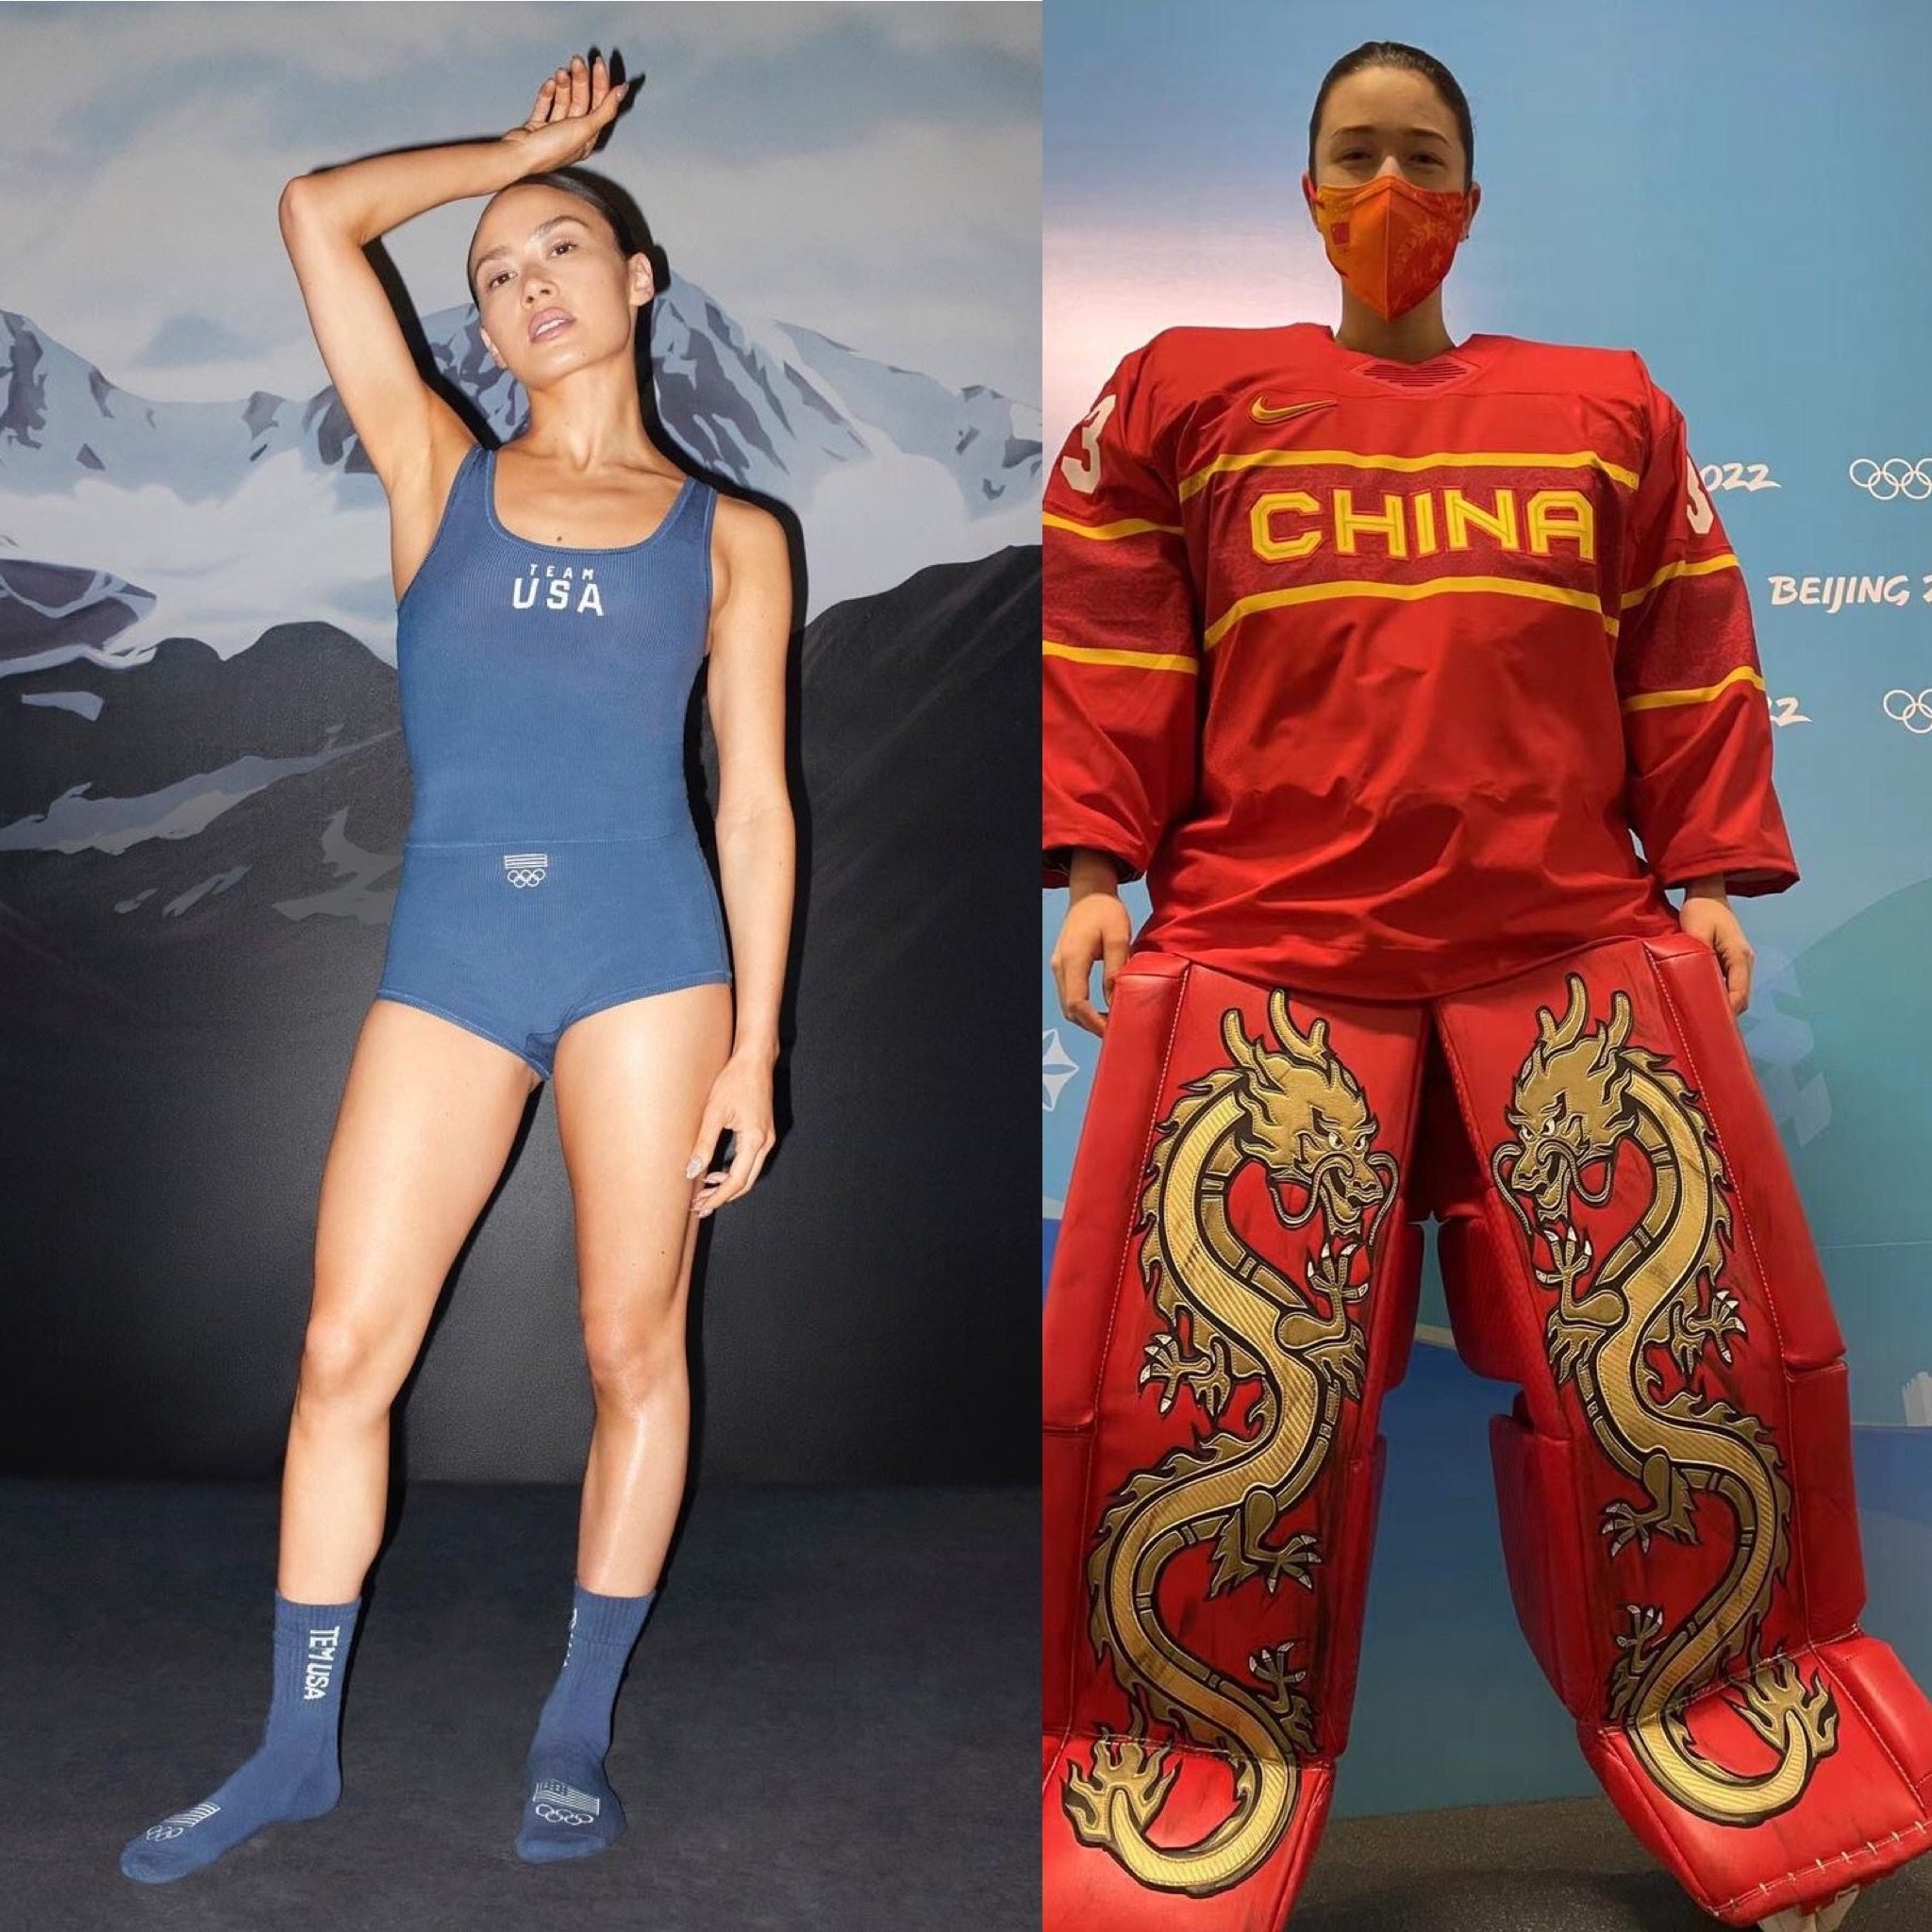 Beijing 22 The Best And Worst Winter Olympics Outfits To Look Out For From Adidas Columbia Uniqlo The North Face Kim Kardashian S Skims And More South China Morning Post